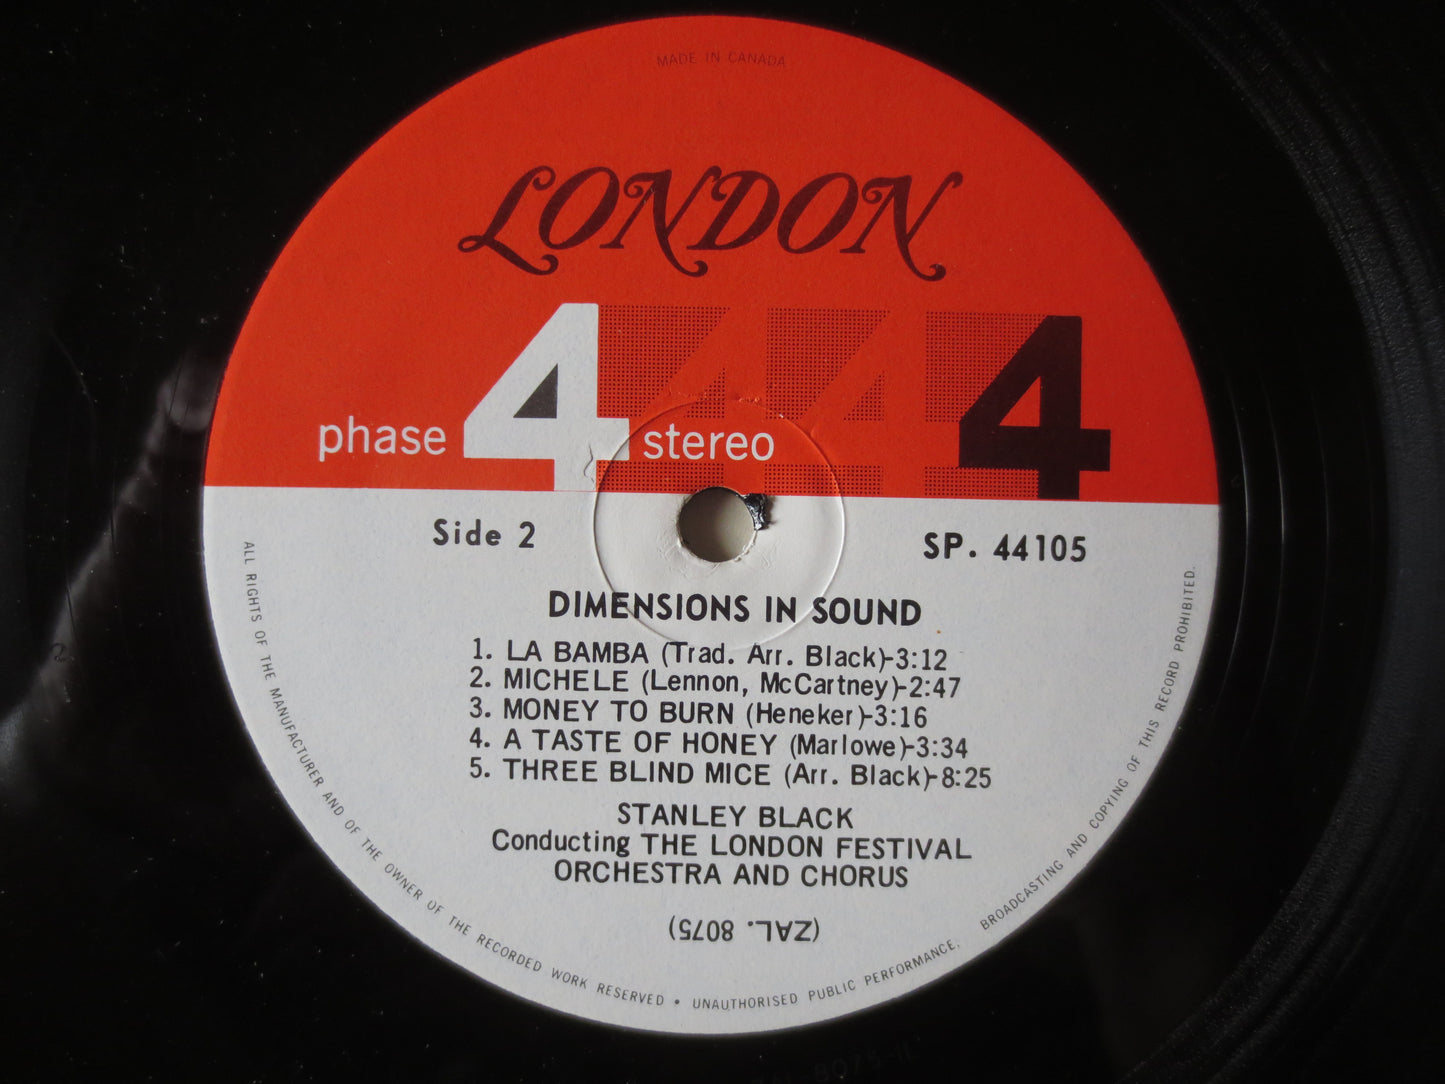 DIMENSIONS in SOUND, Phase 4 Records, STANLEY Black, Orchestra Records, Stanley Black Albums, Vinyl Album, Lps, 1968 Record